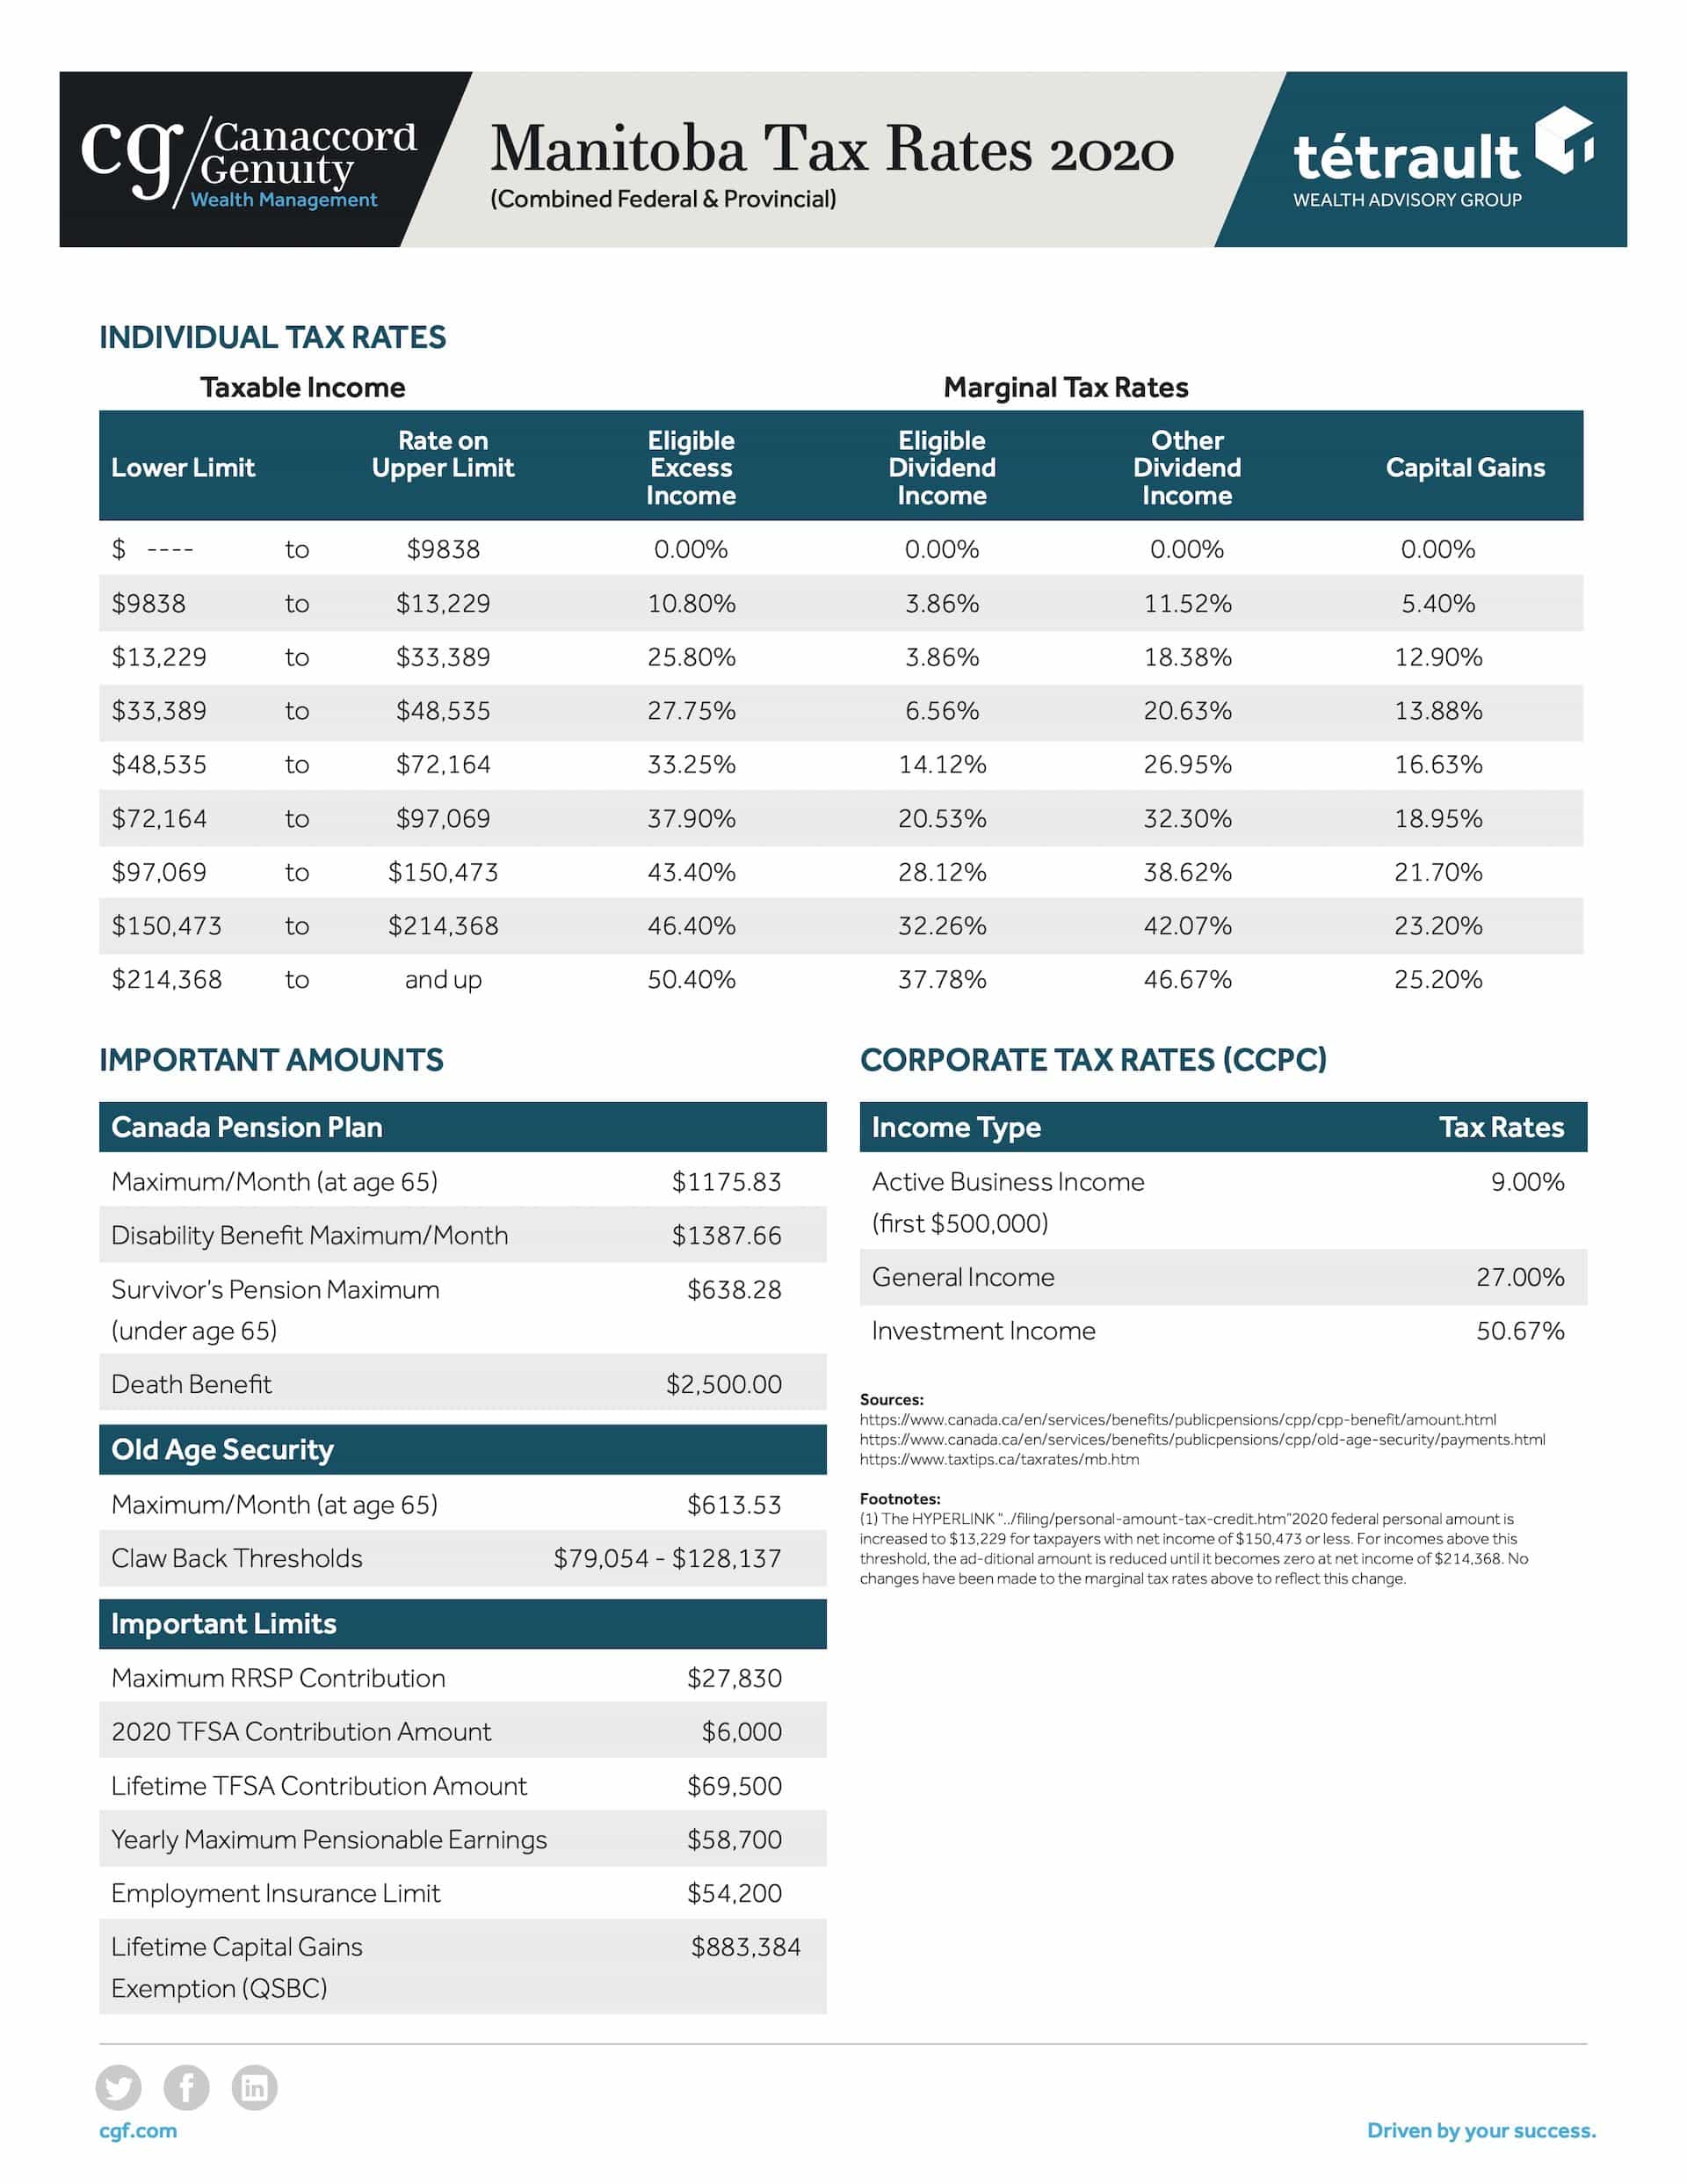 Manitoba Tax Rates 2020 – Combined Federal & Provincial